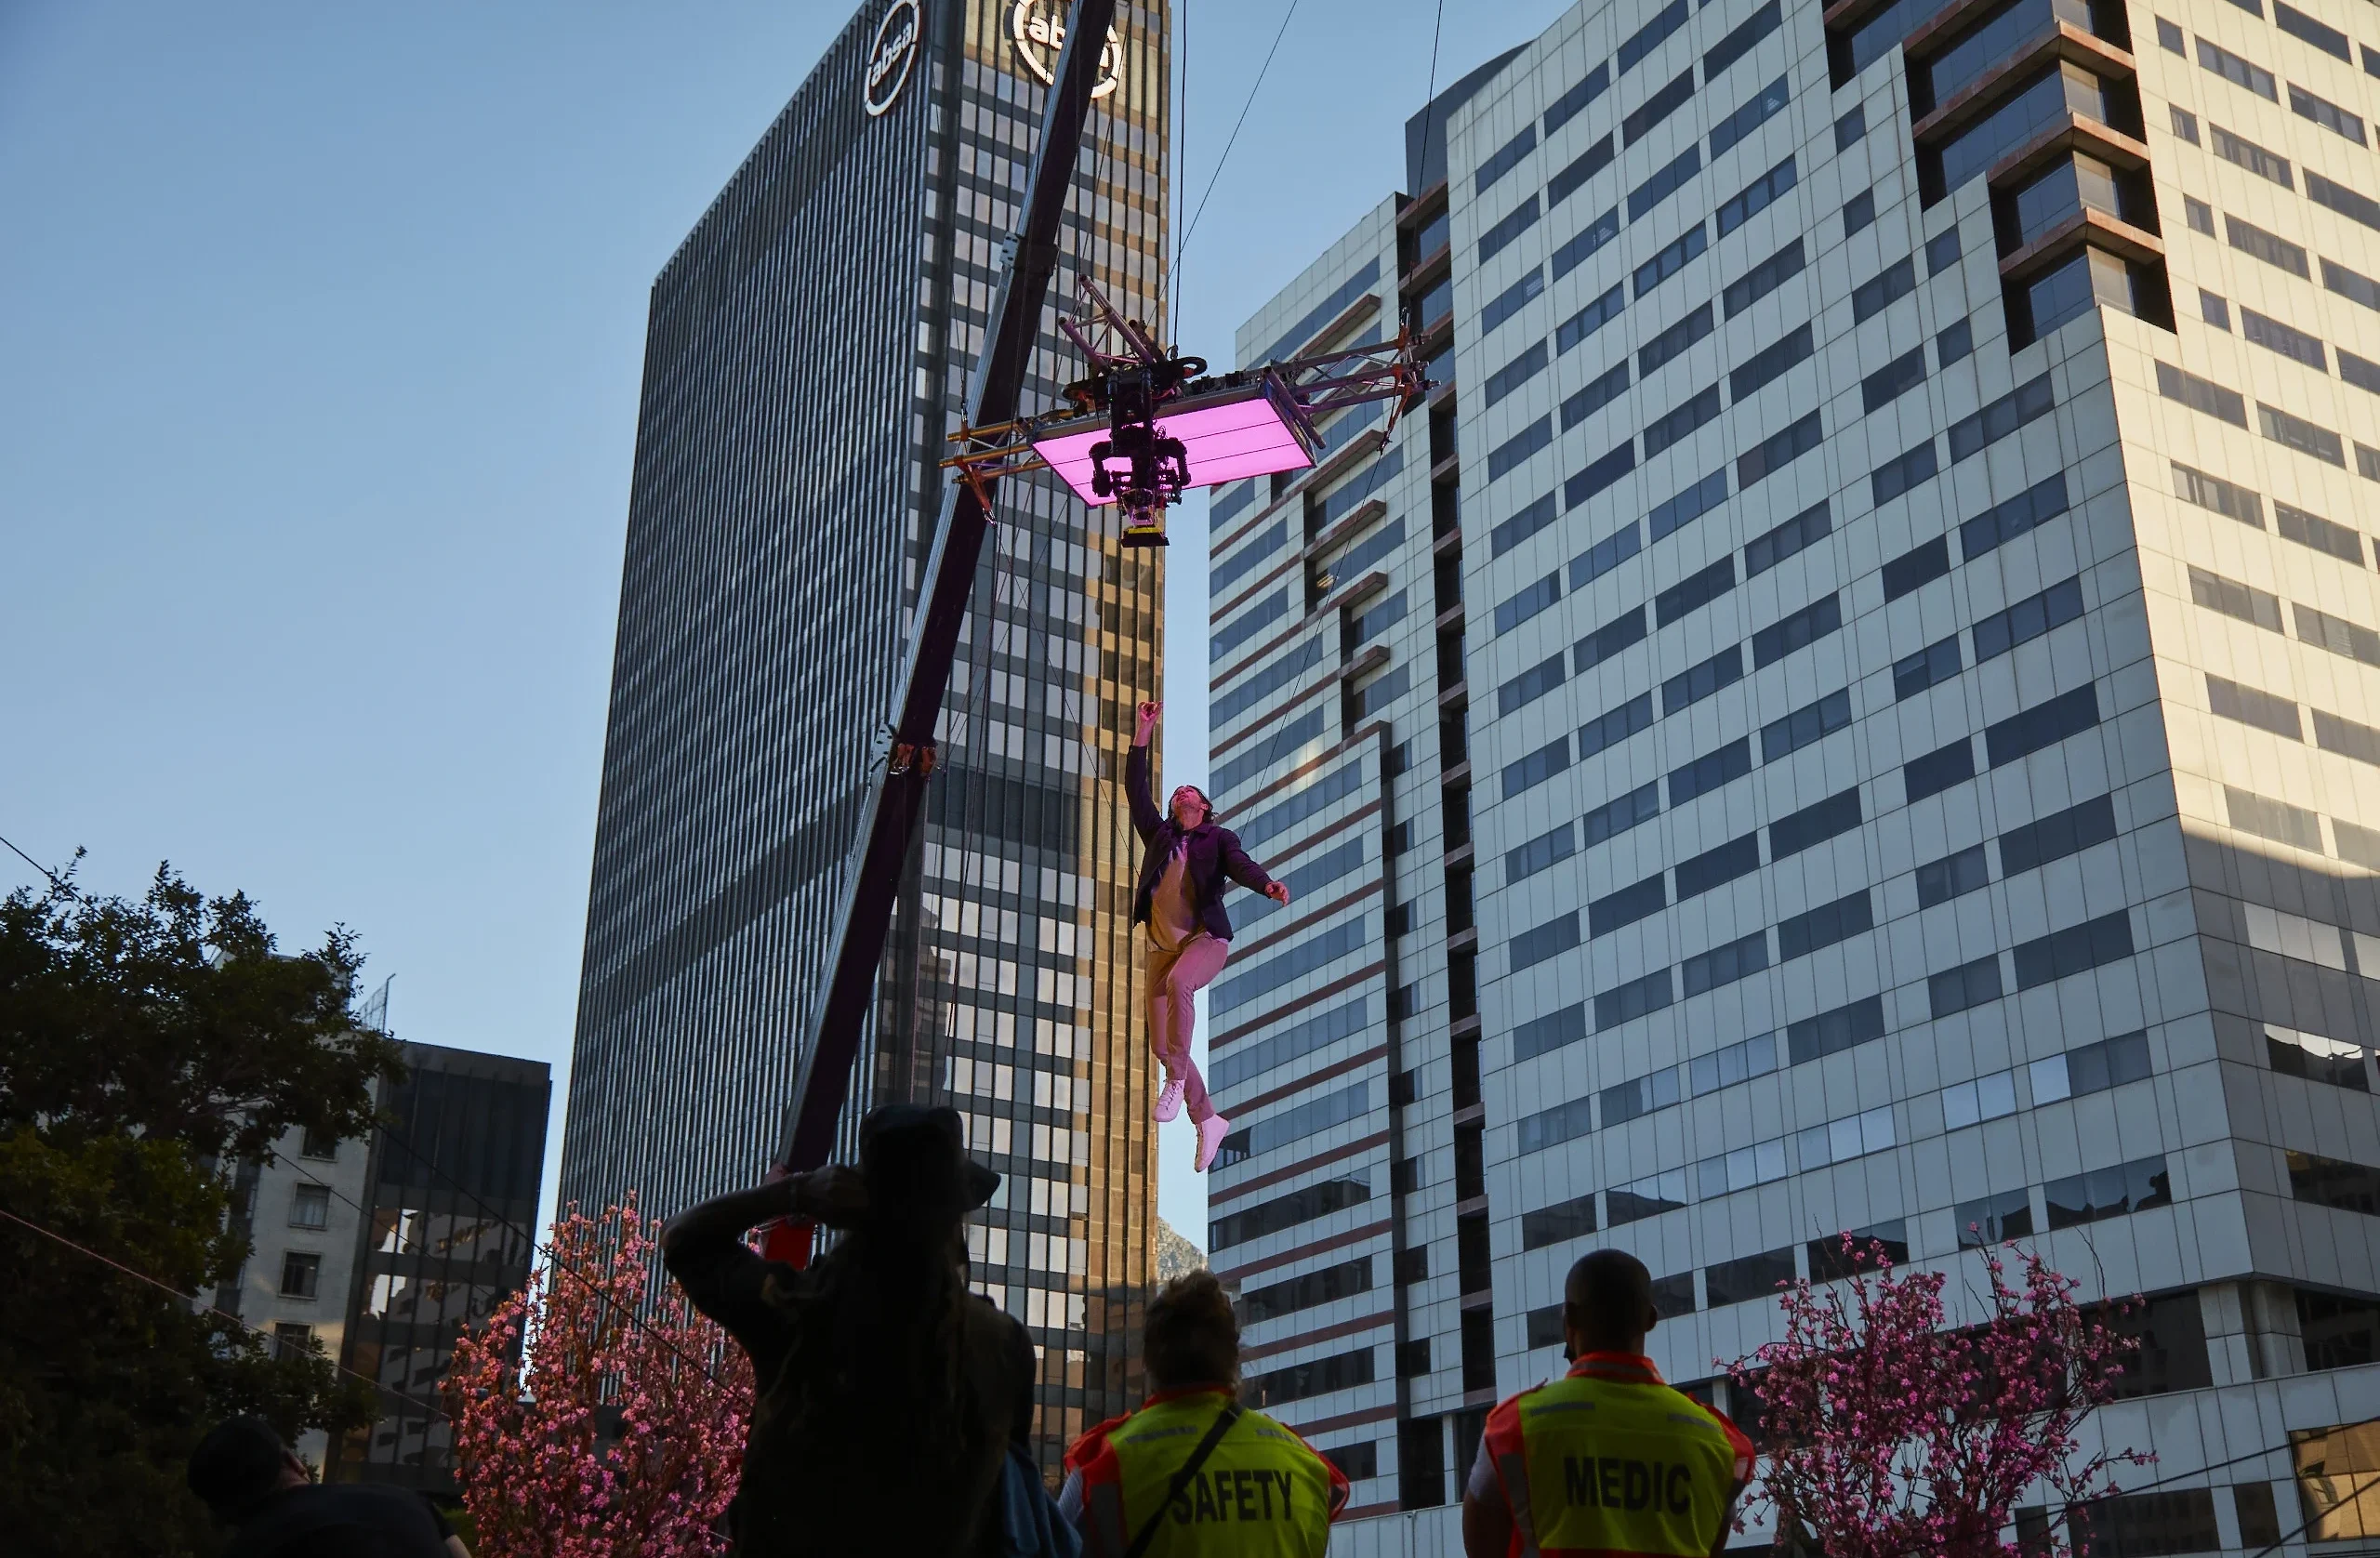 Behind the scenes image from City Index TVC filming. Actor is being lifted into the air via a crane, with a camera above him to capture the shot.